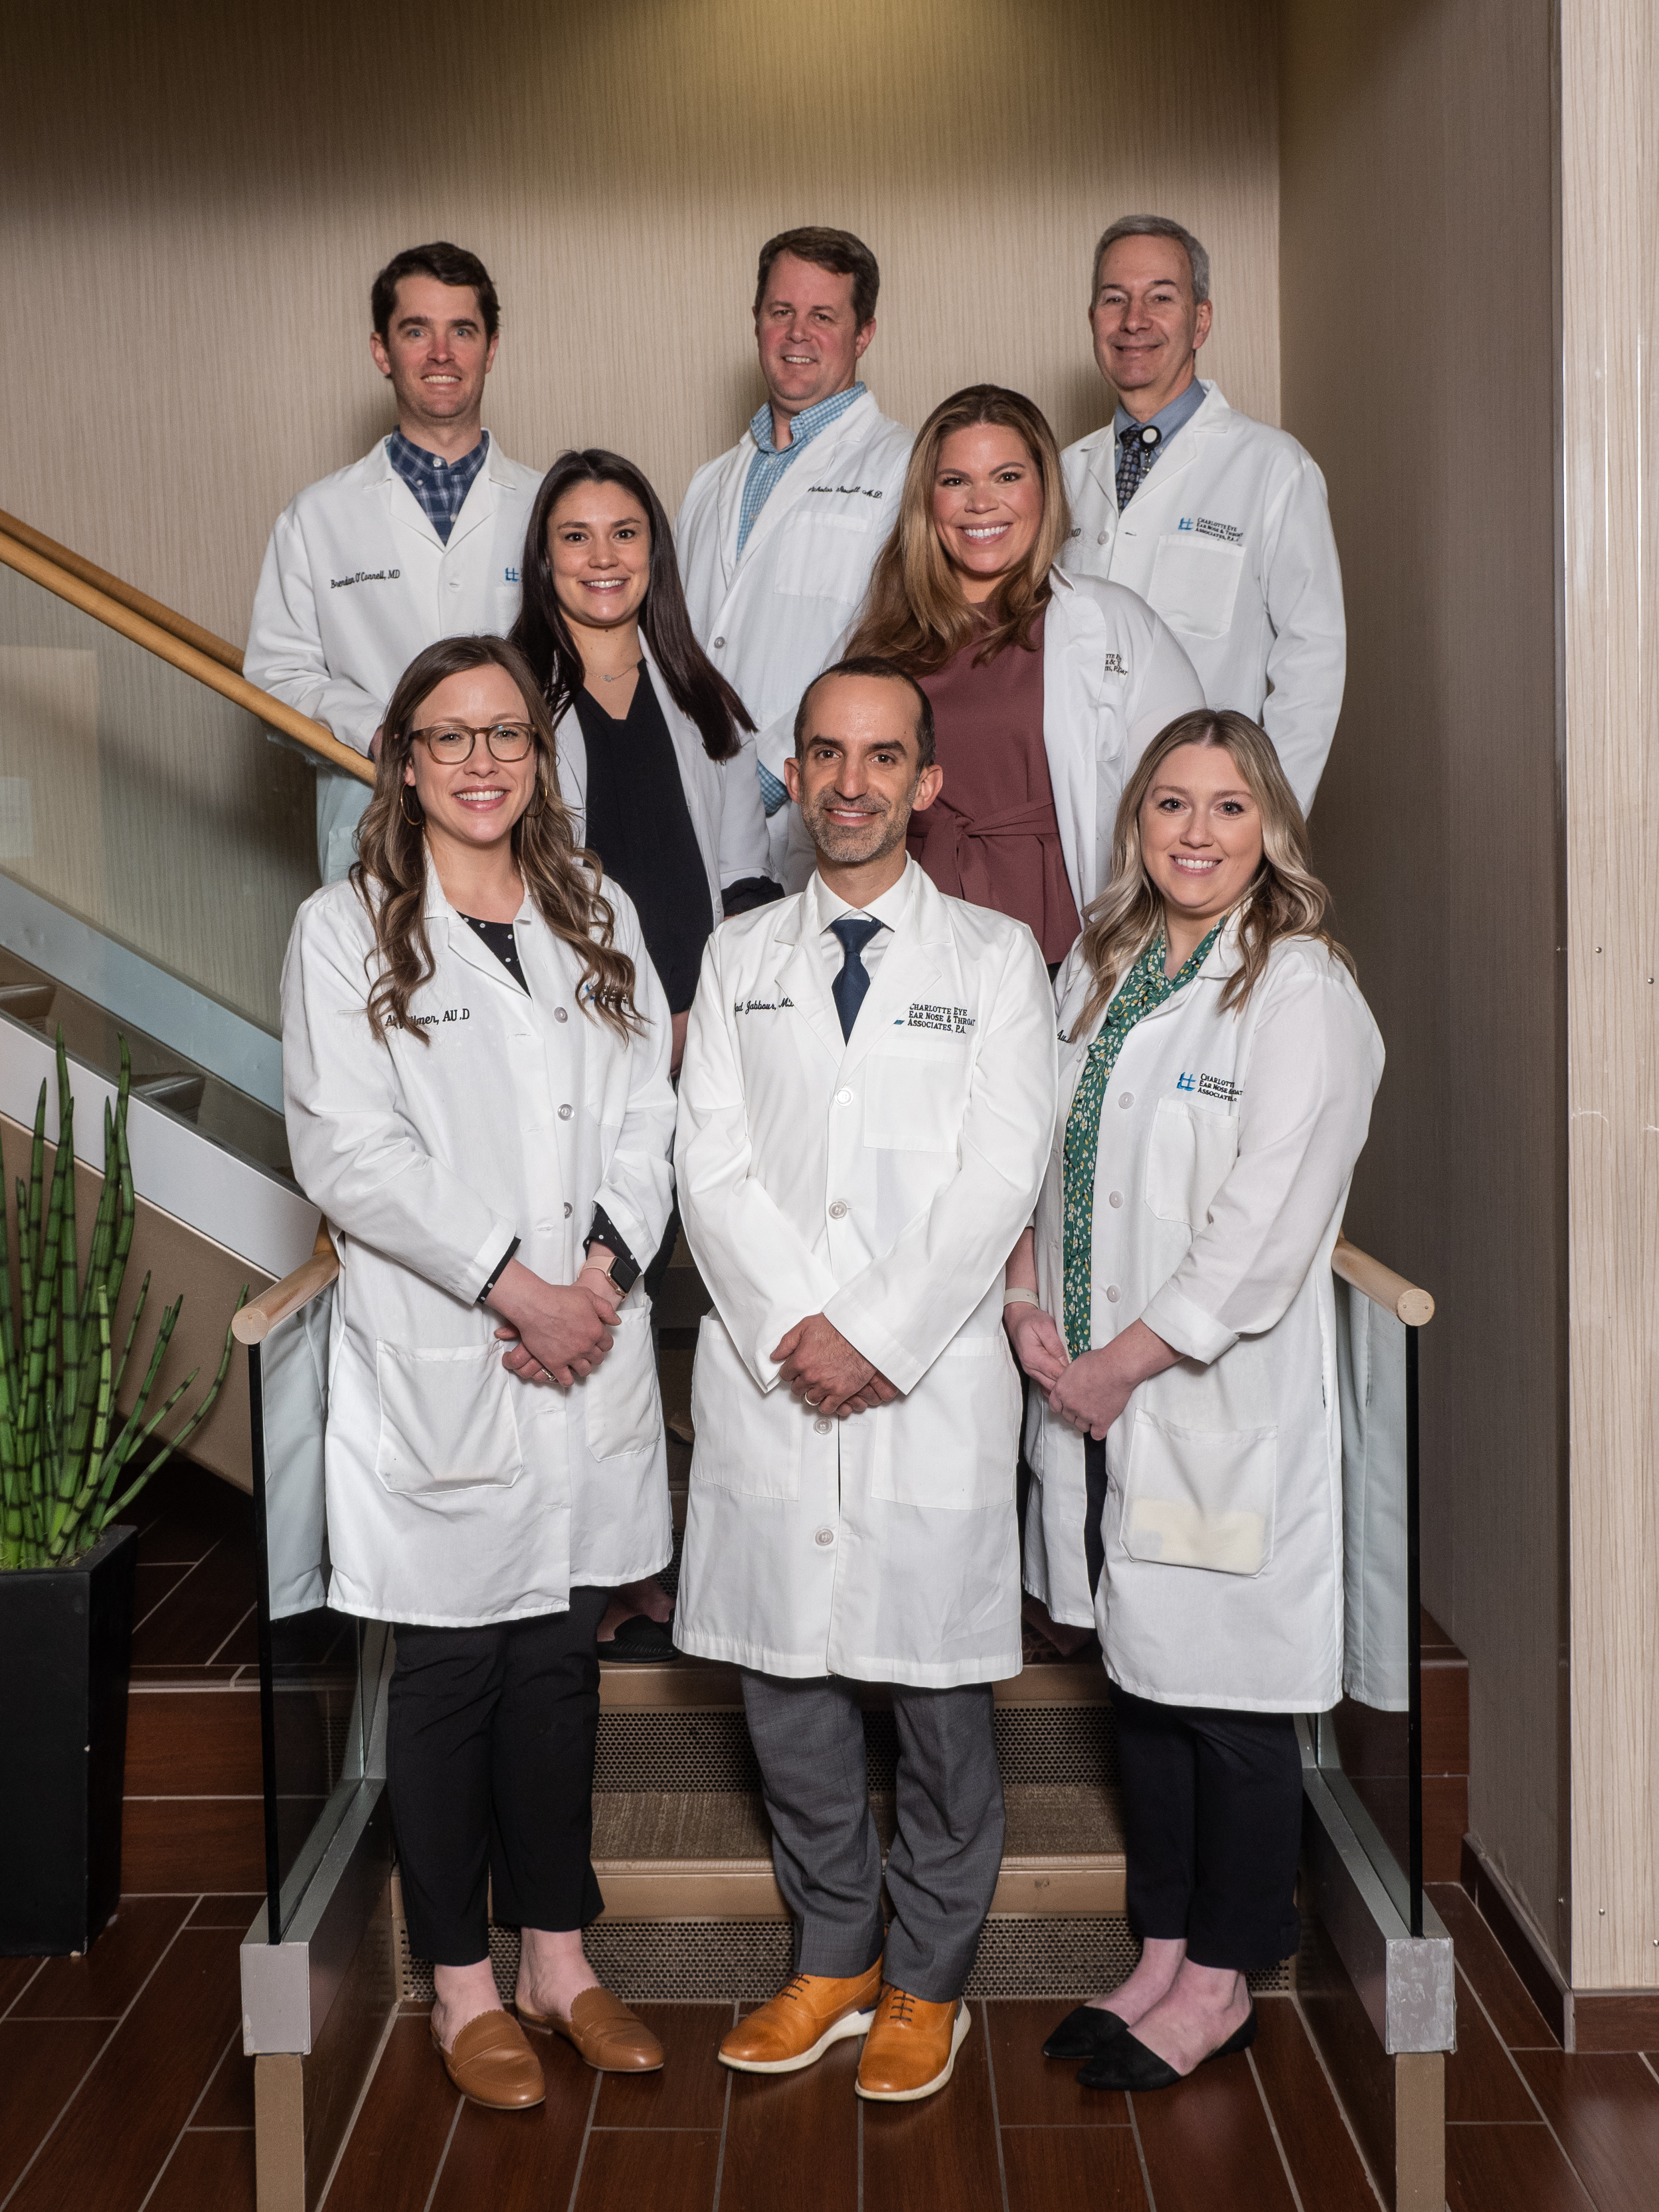 CEENTA's team of cochlear implant specialists